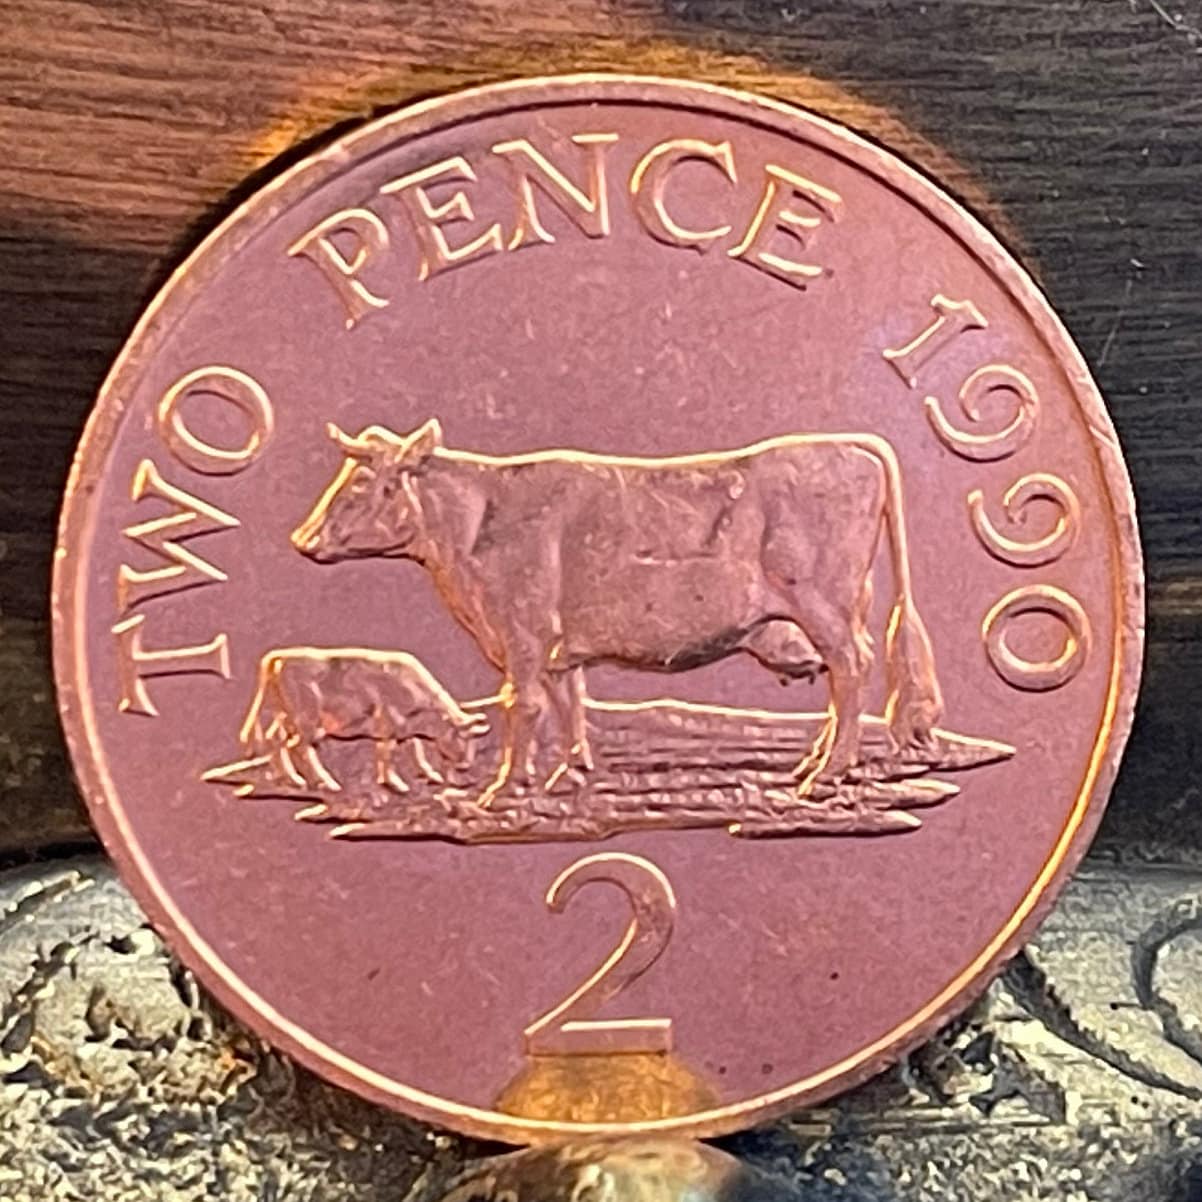 Guernsey Cows 2 Pence Bailiwick of Guernsey Authentic Coin Money for Jewelry and Craft Making